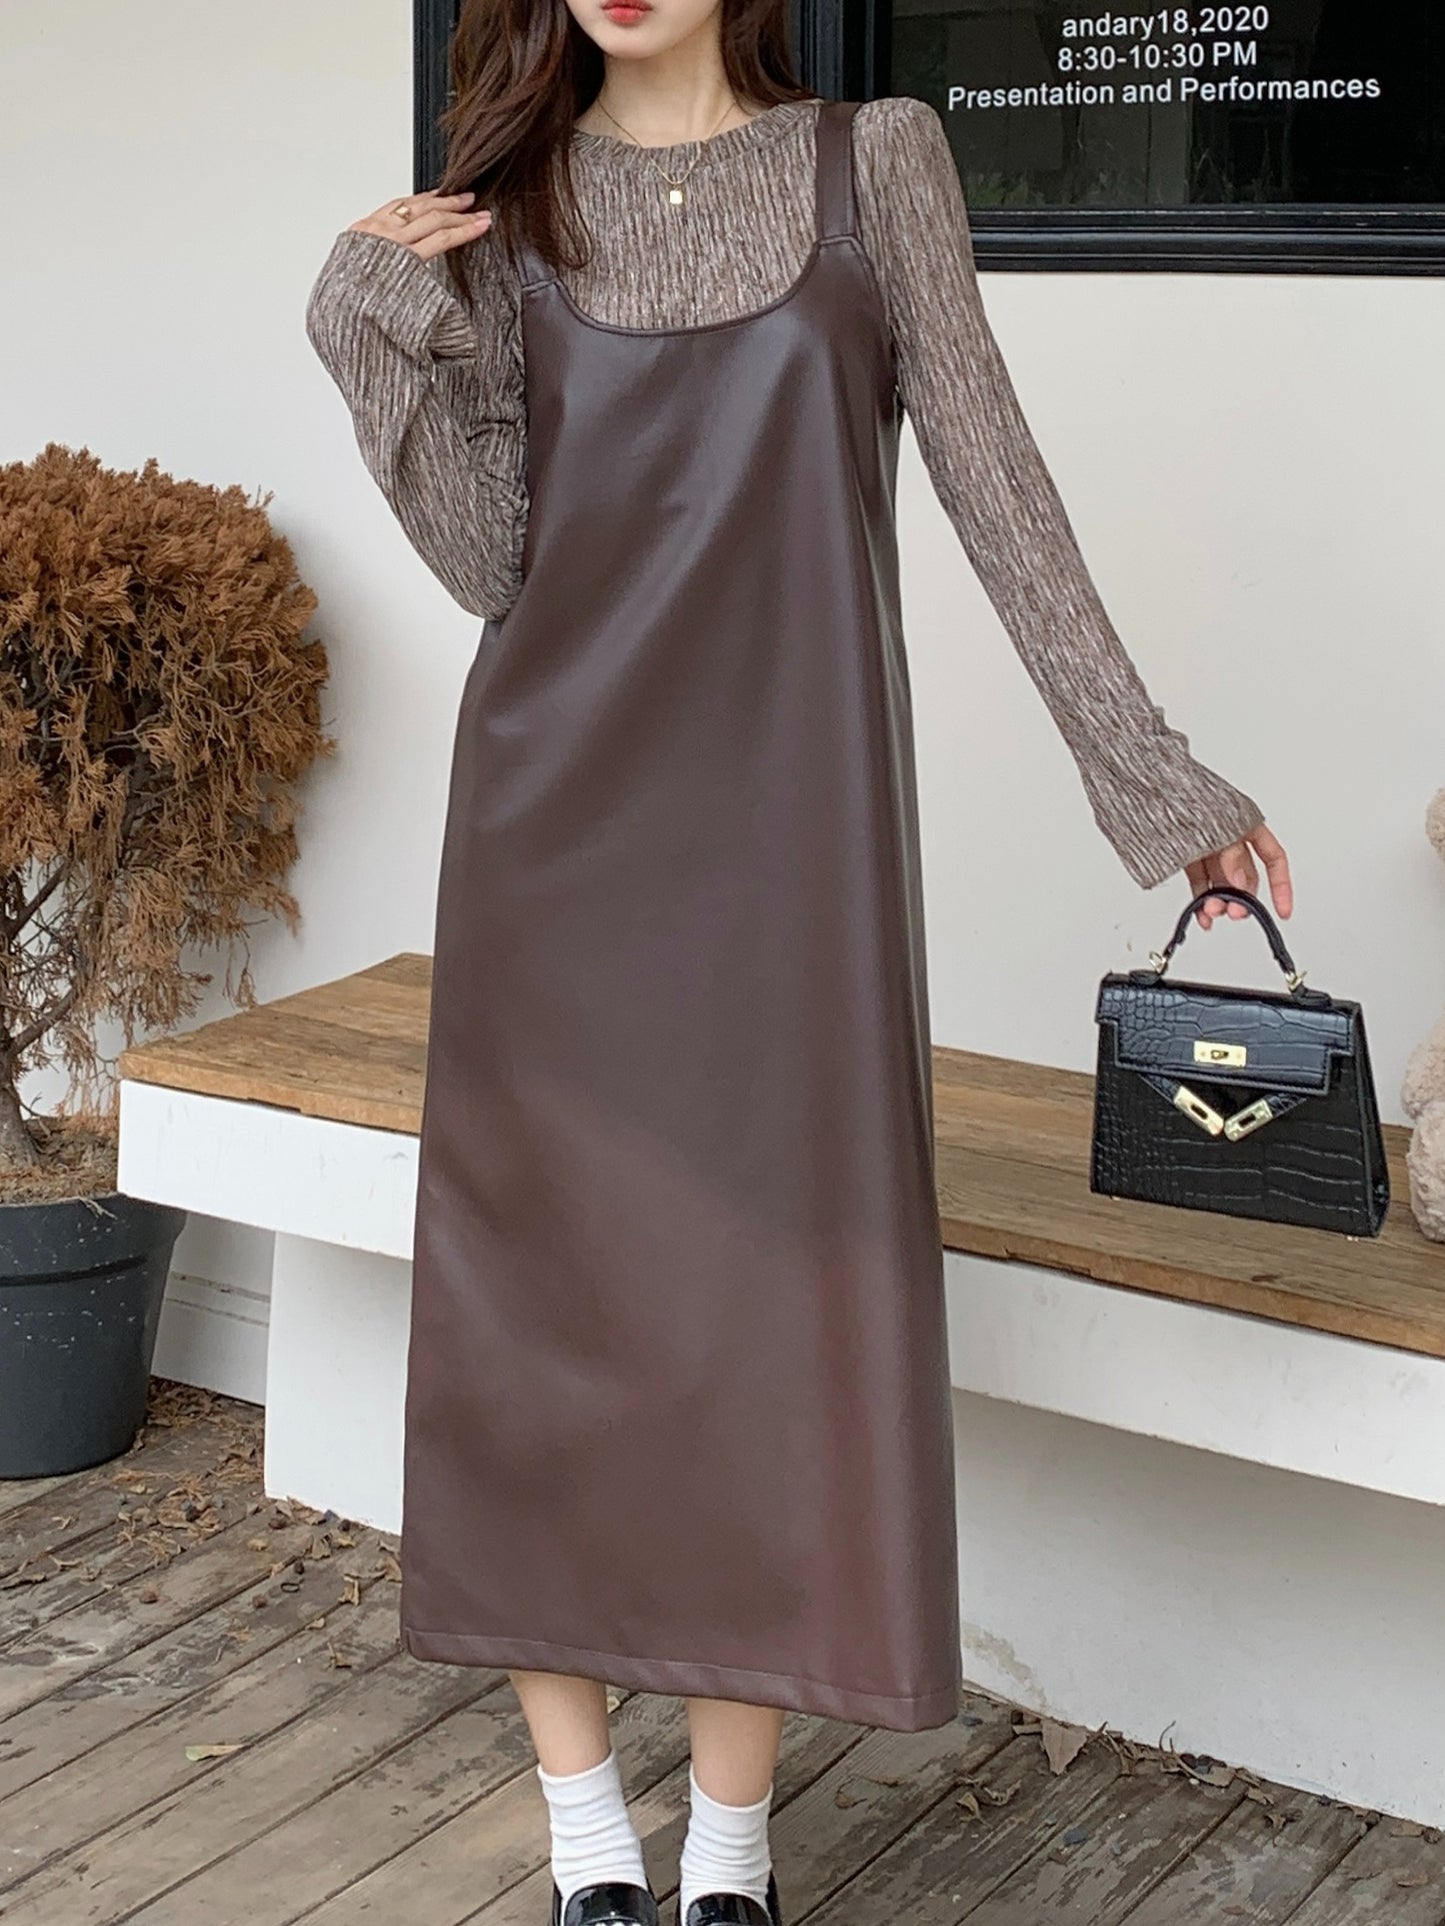 PU Leather Overall Dress